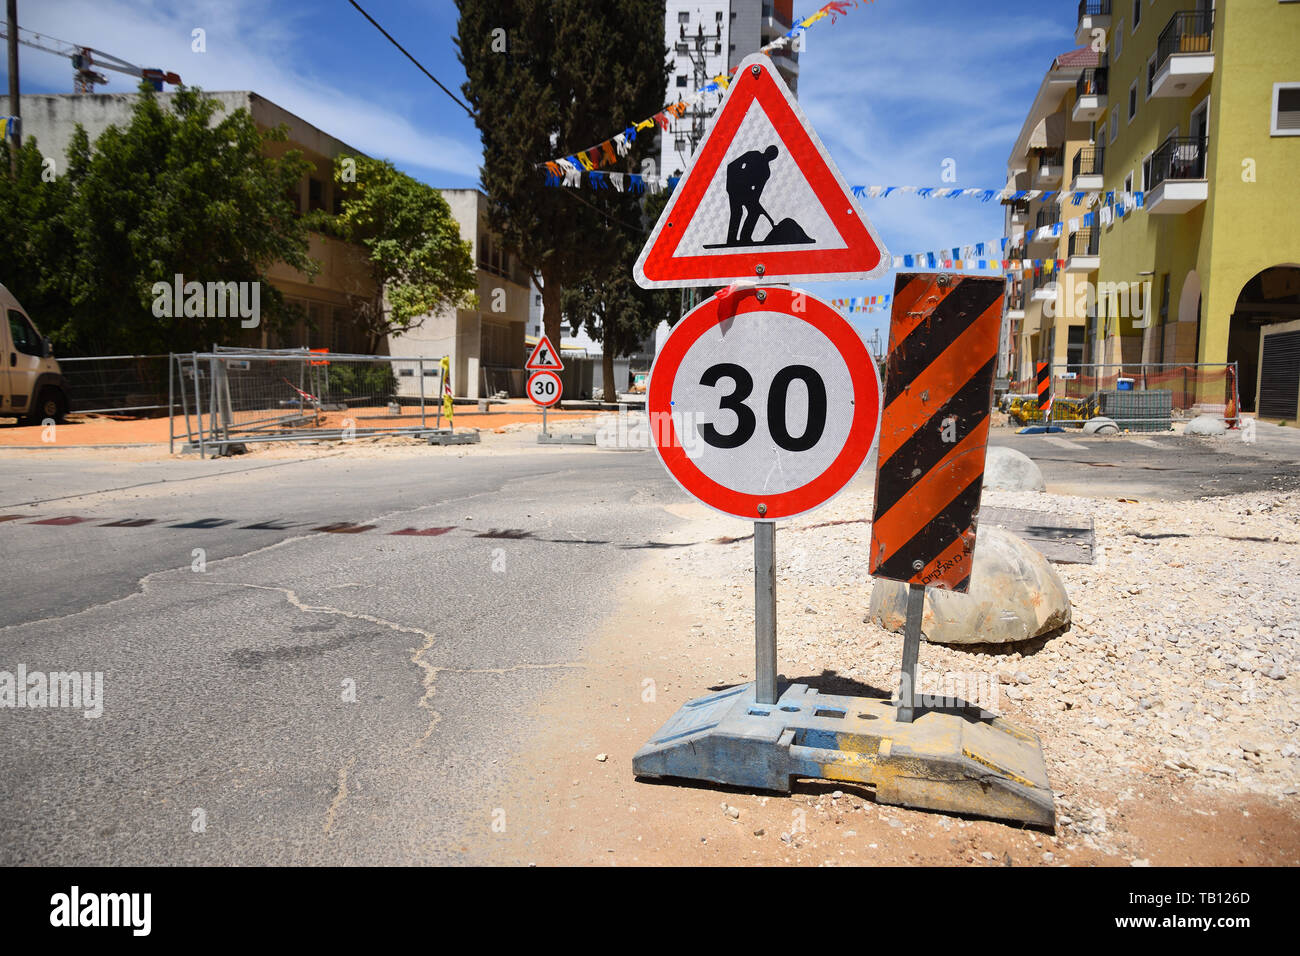 Roadwork and speed limit traffic signs in Yehud - small city in central Israel. Stock Photo